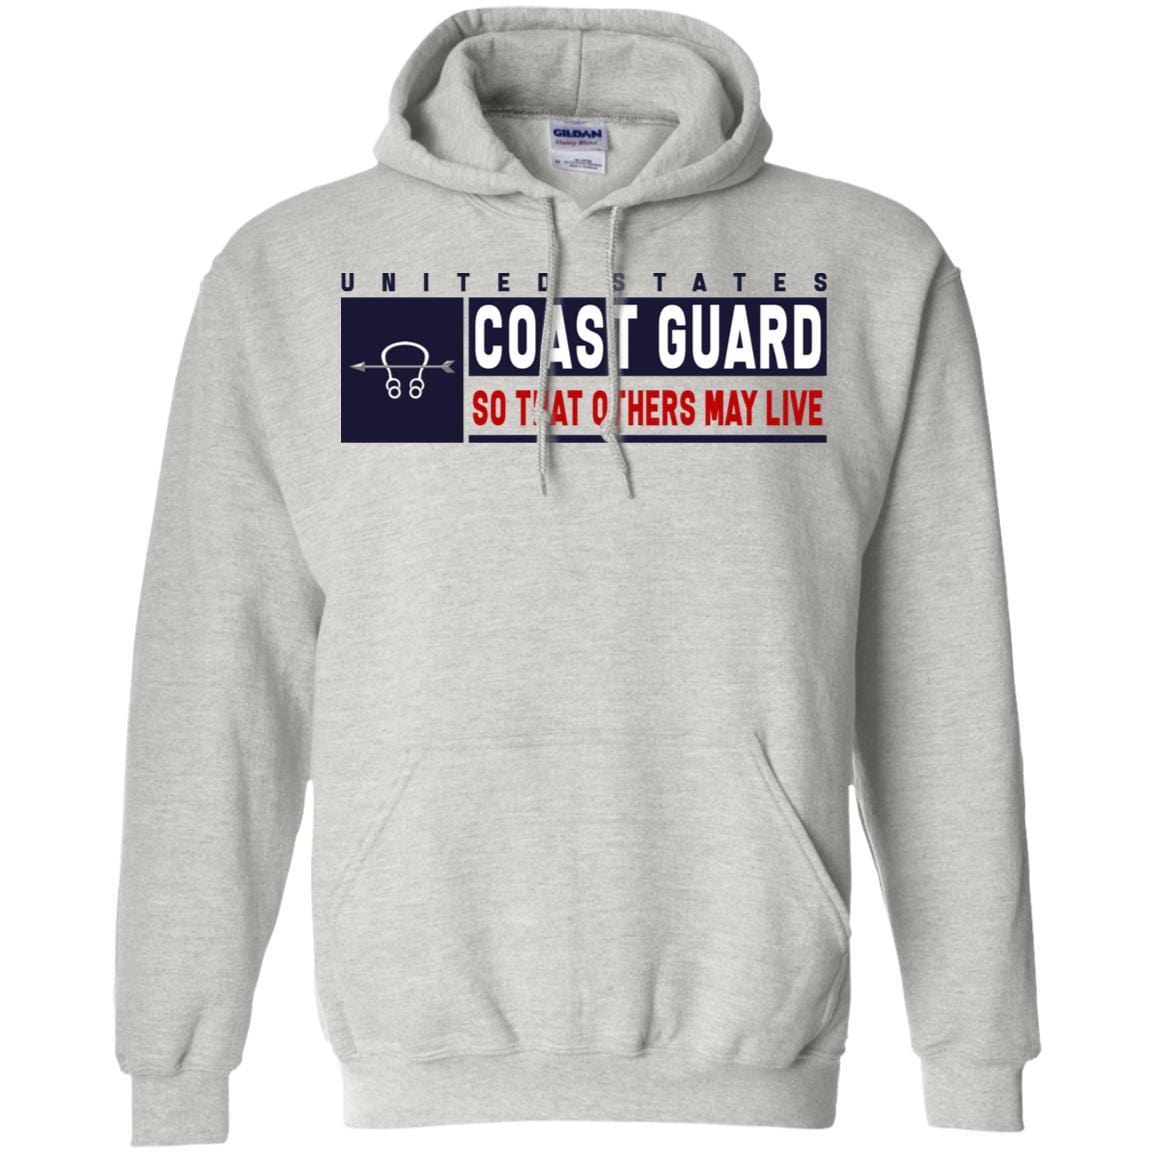 US Coast Guard Sonar Technician ST Logo- So that others may live Long Sleeve - Pullover Hoodie-TShirt-USCG-Veterans Nation